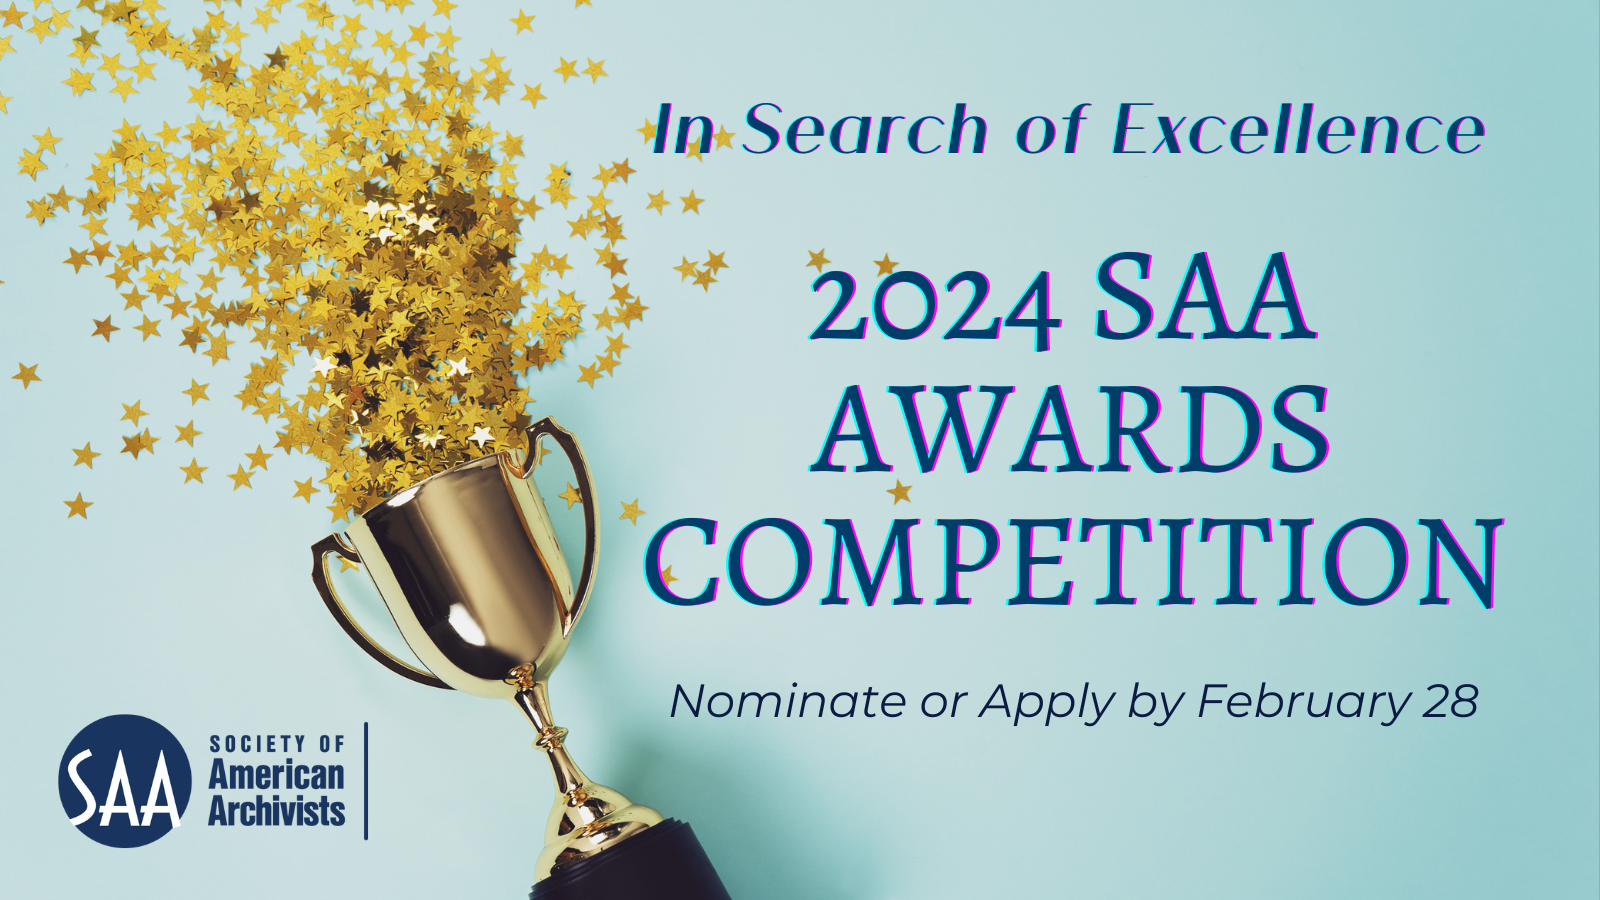 SAA 2024 Awards and Scholarships Society of American Archivists